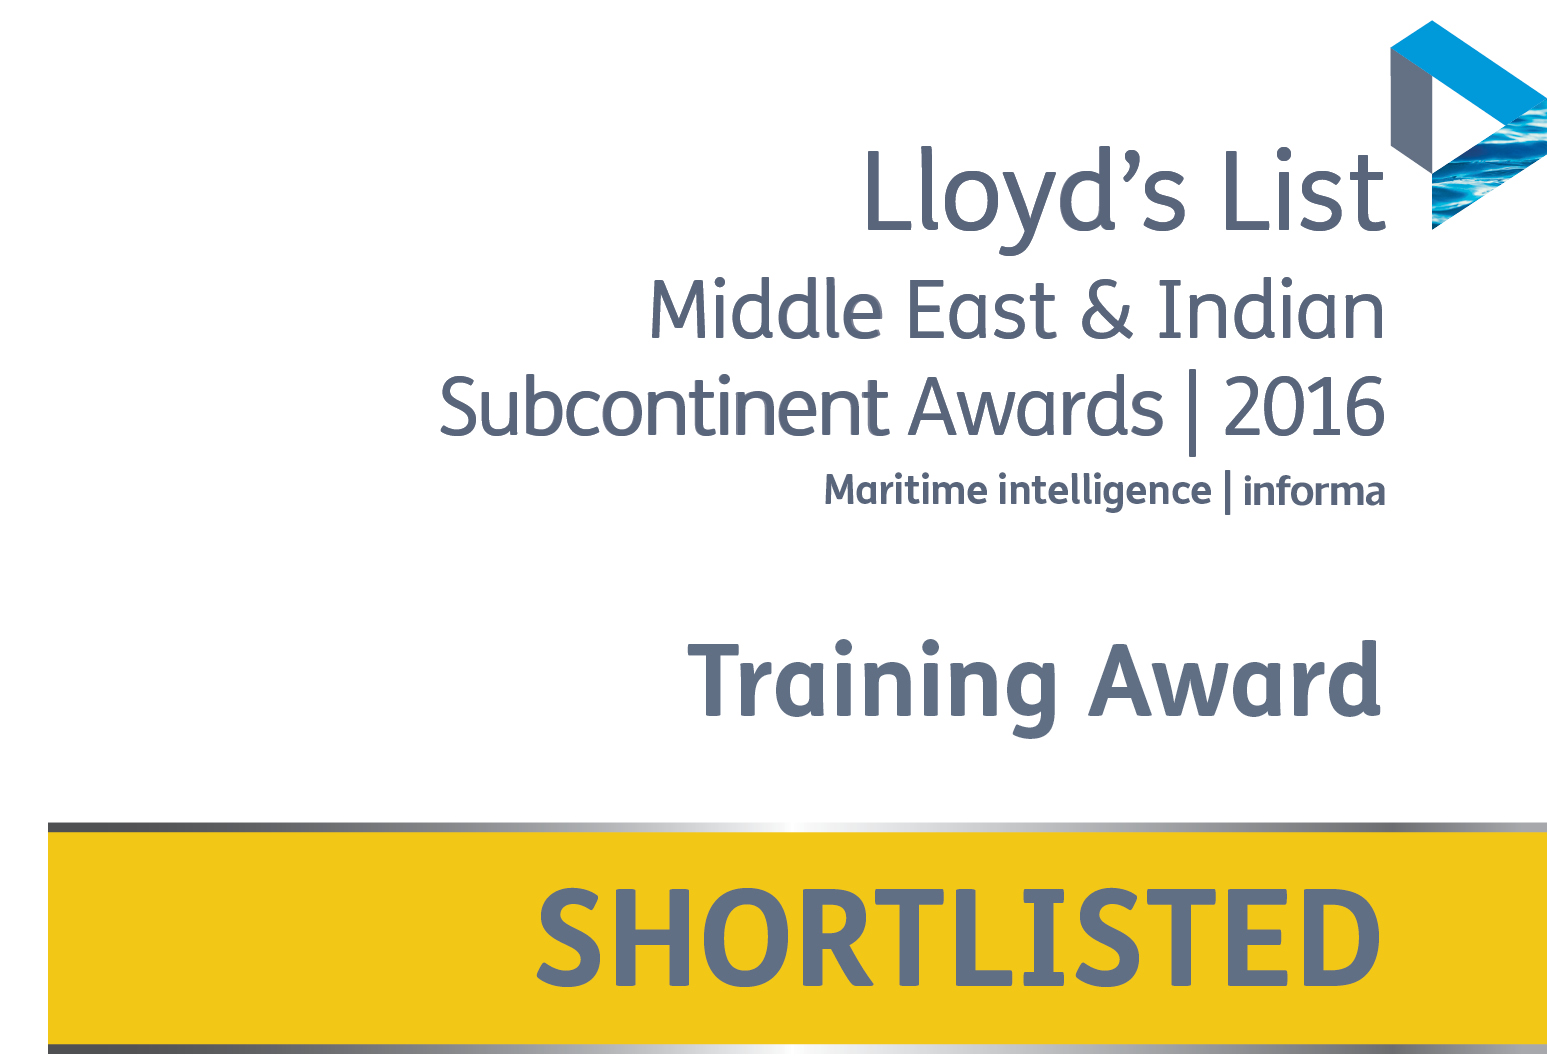 SHORTLISTED TRAINING AWARD at LLOYD's LIST MIDDLE EAST & INDIAN SUBCONTINENT AWARD 2016